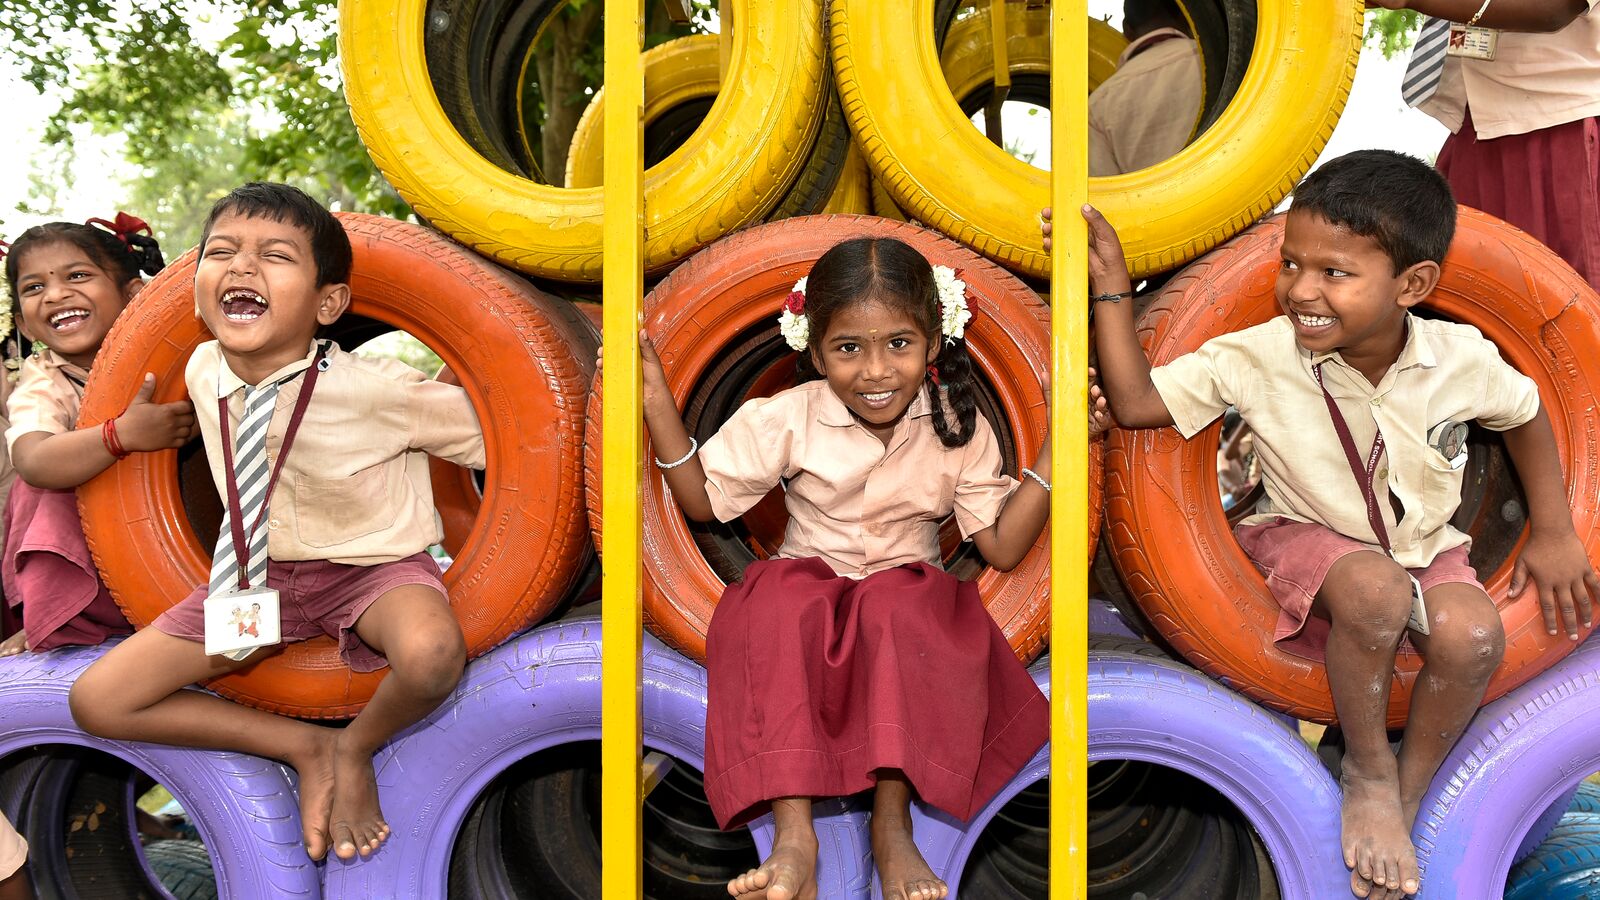 Children in India playing at school